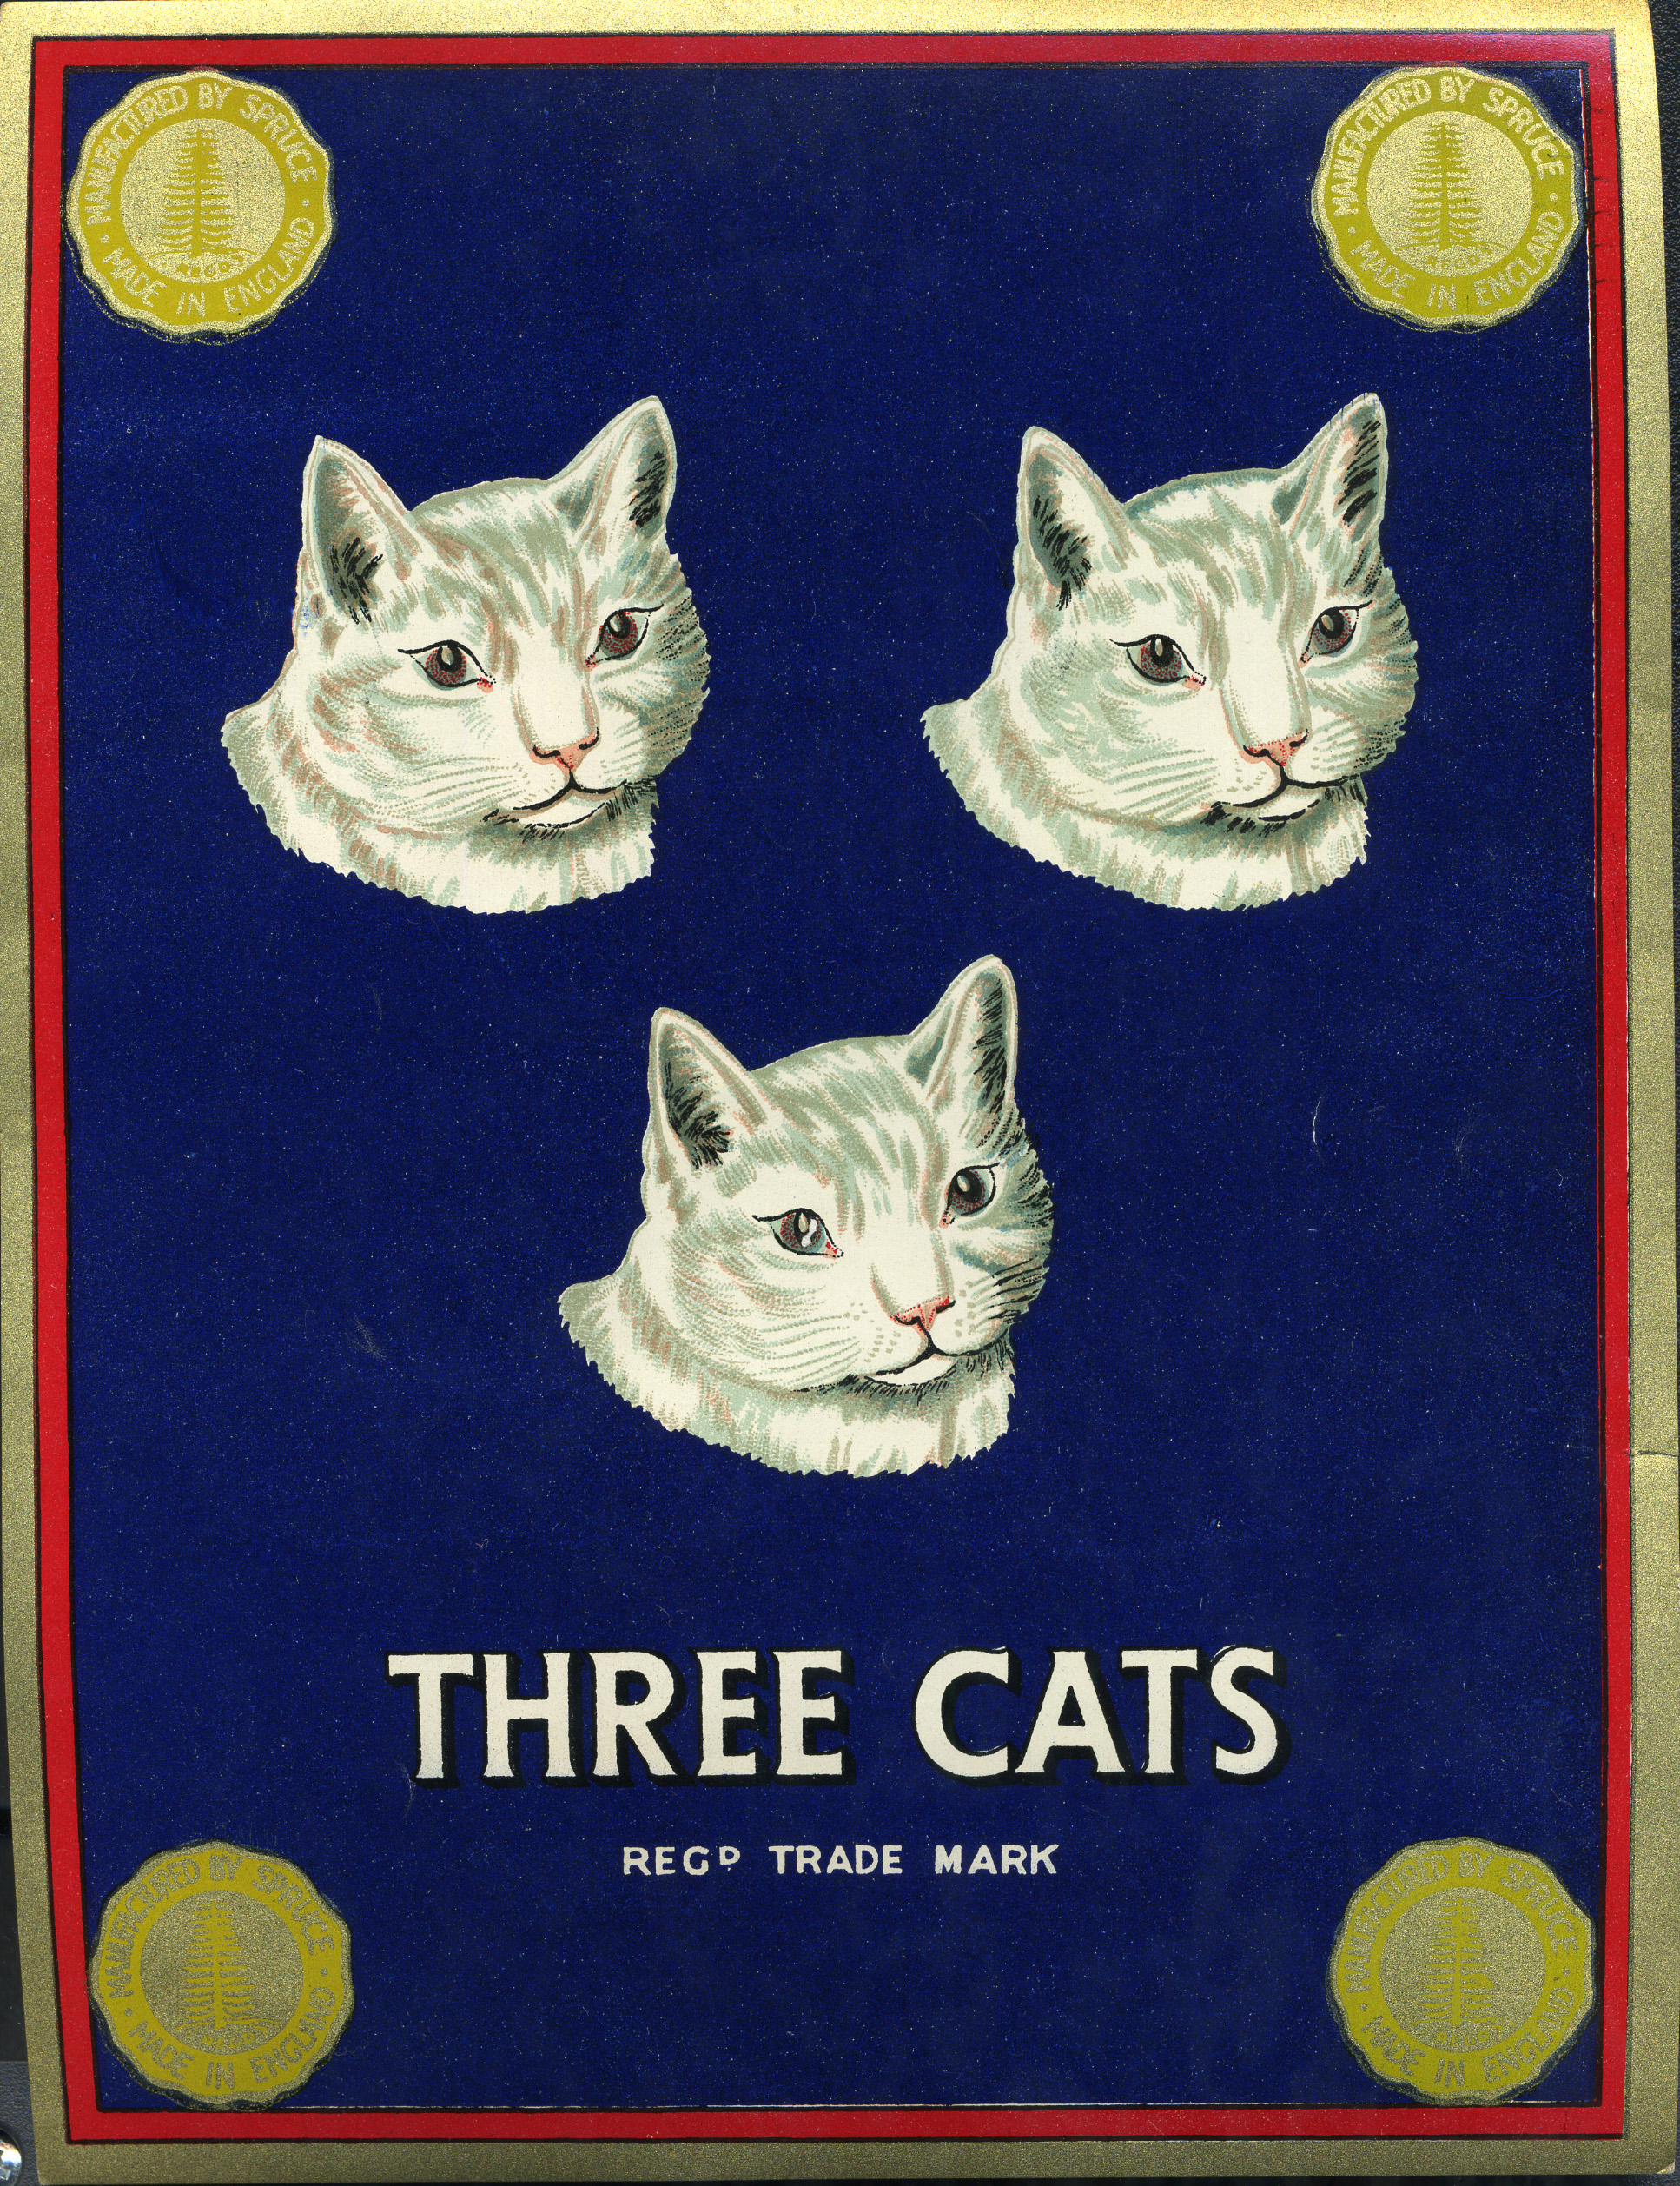 A shipper's ticket from the collection at the Museum of Science and Industry showing three white cats against a blue background